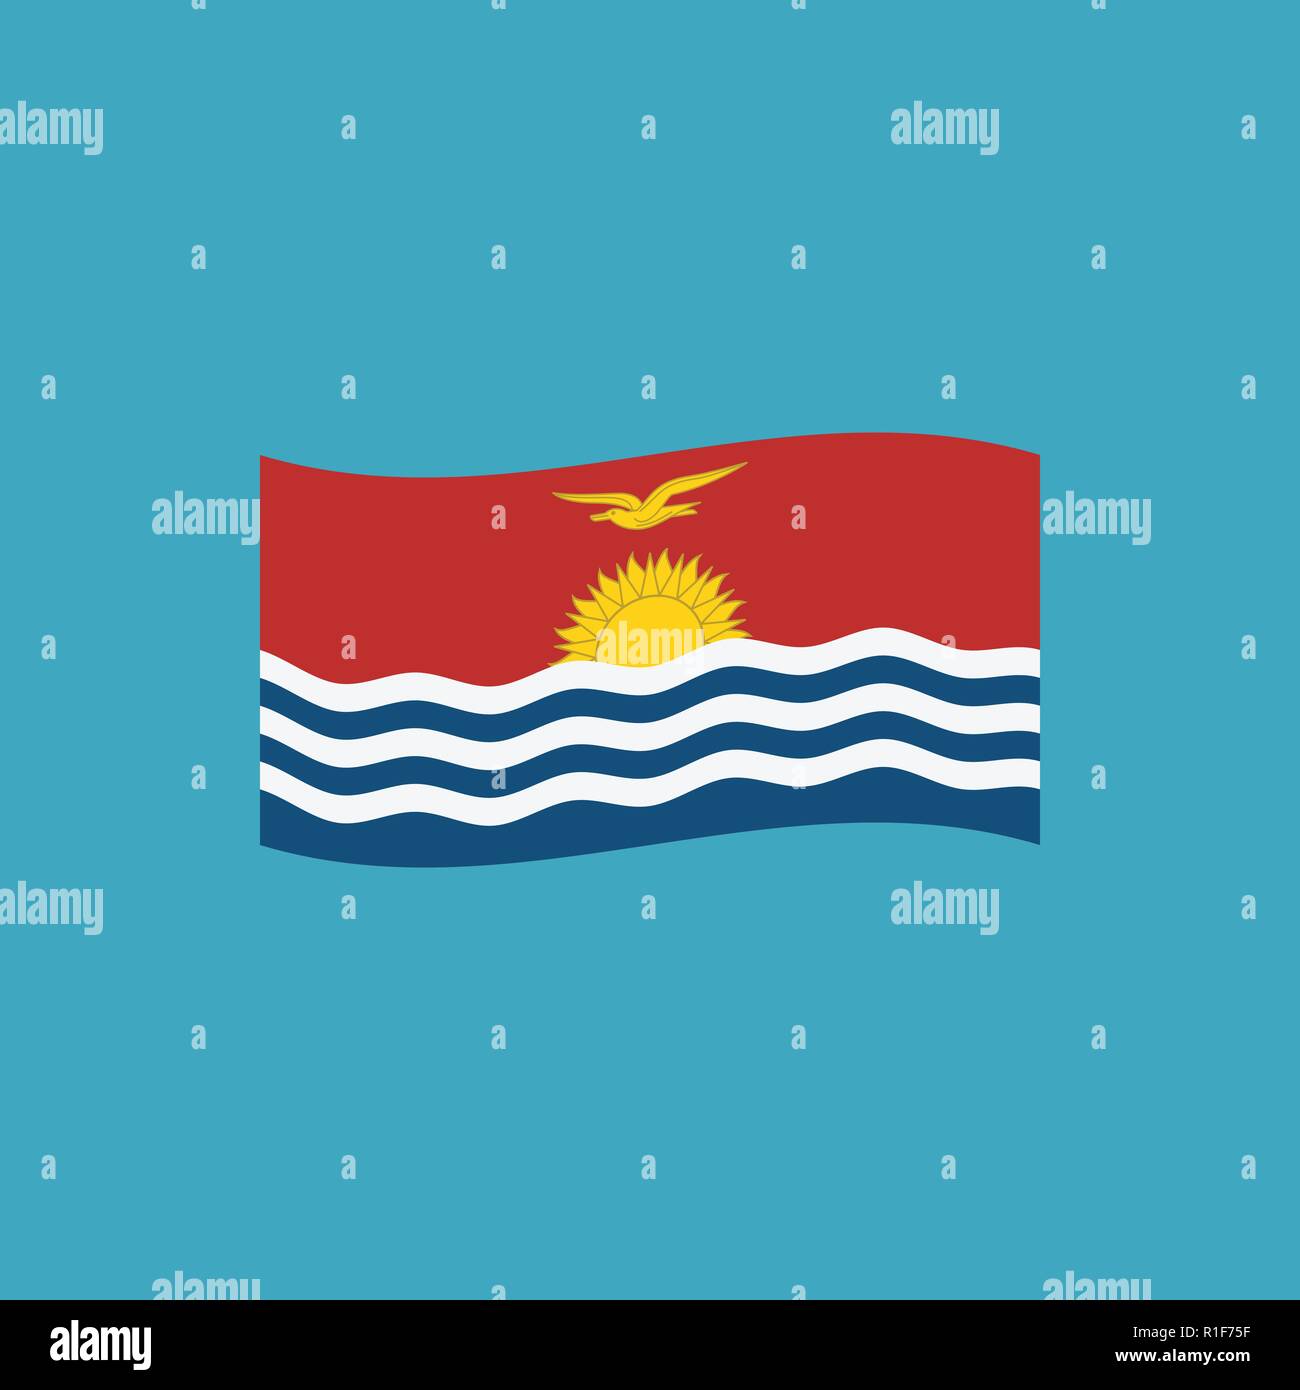 Kiribati flag icon in flat design. Independence day or National day holiday concept. Stock Vector